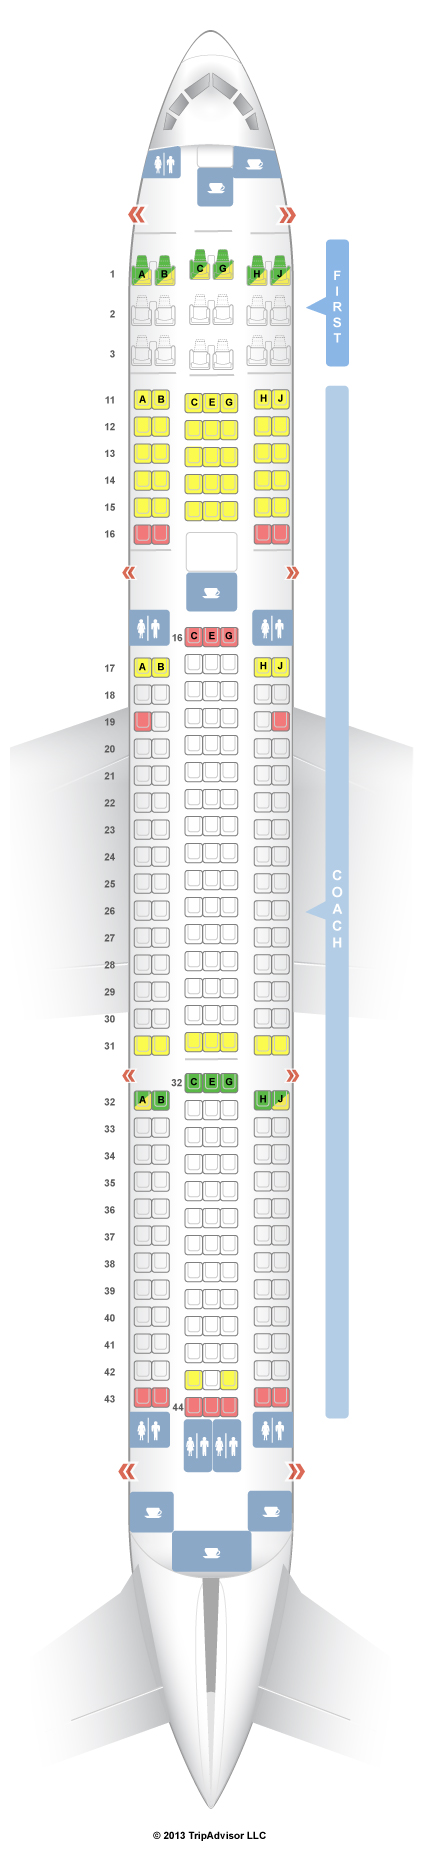 seat assignments on hawaiian airlines